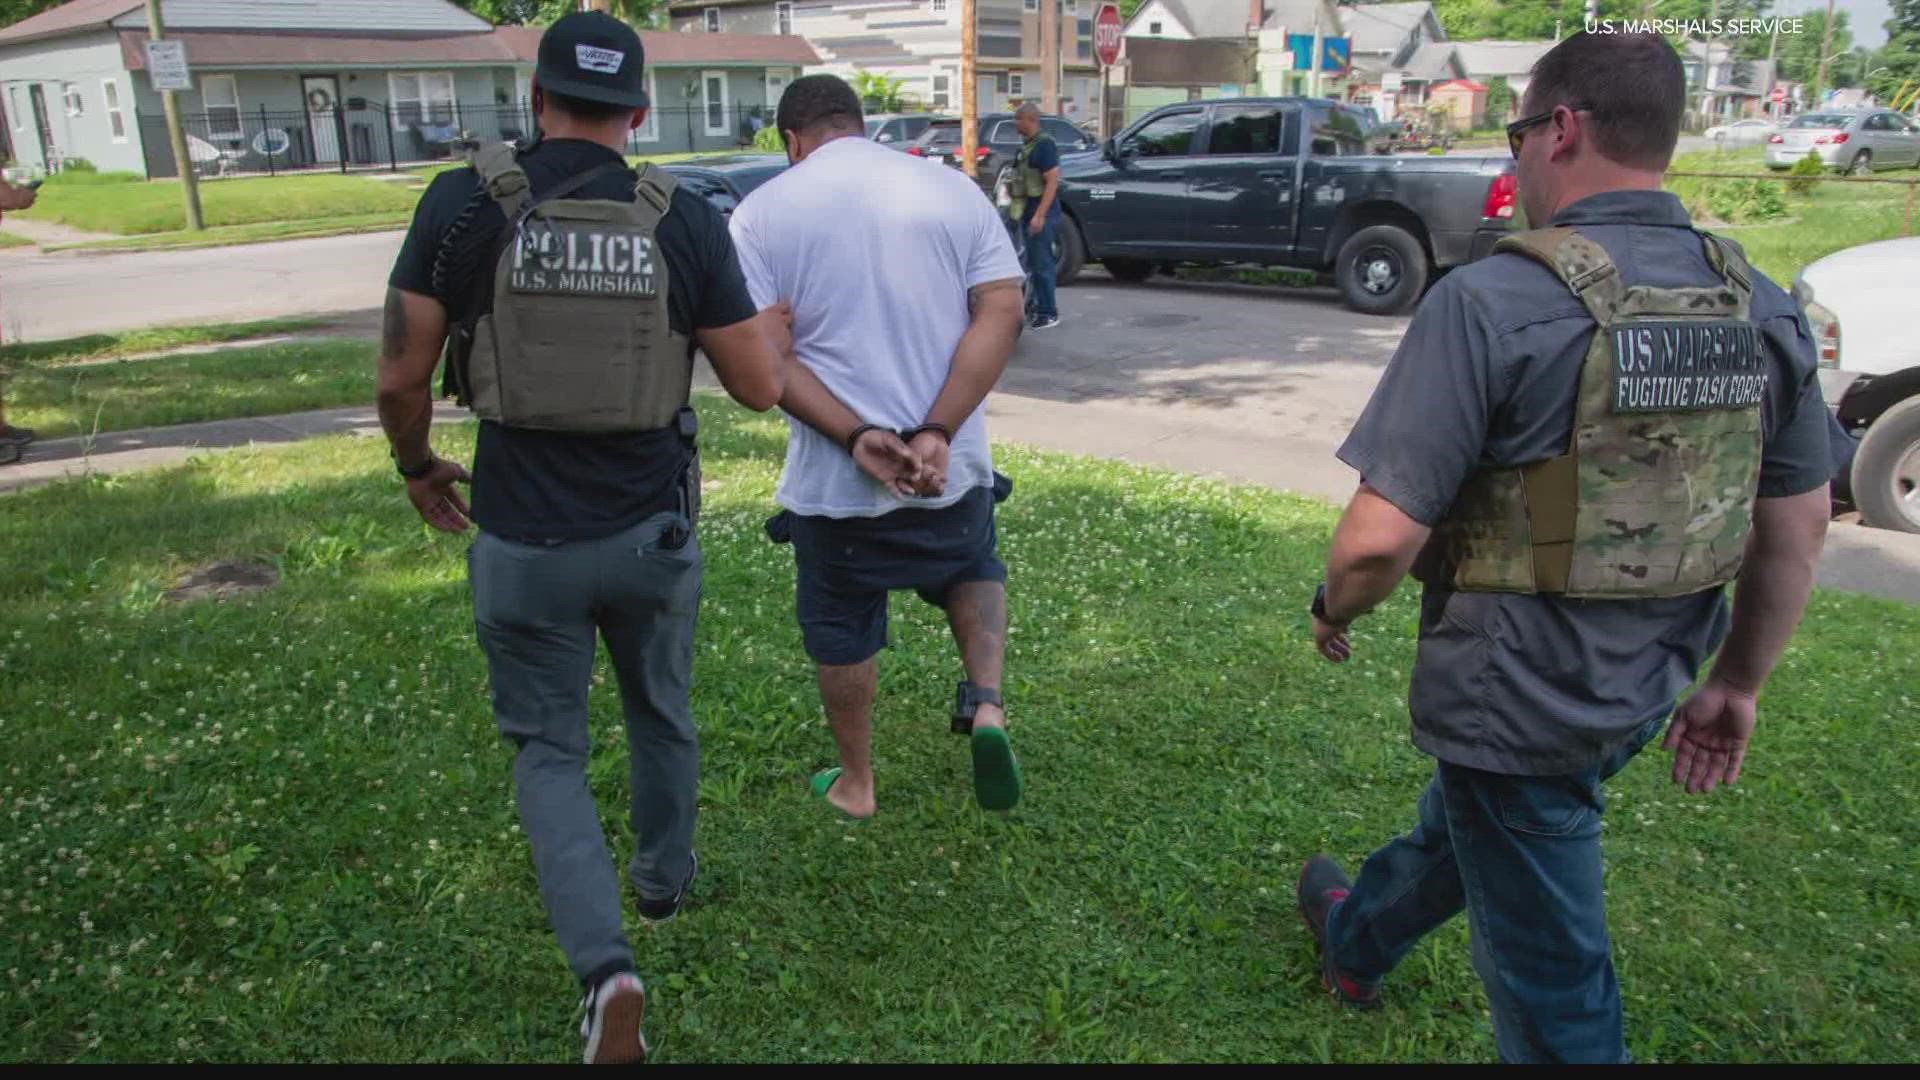 Indianapolis was among 10 cities selected for the operation that help make 60 local arrests of fugitives and alleged violent offenders.